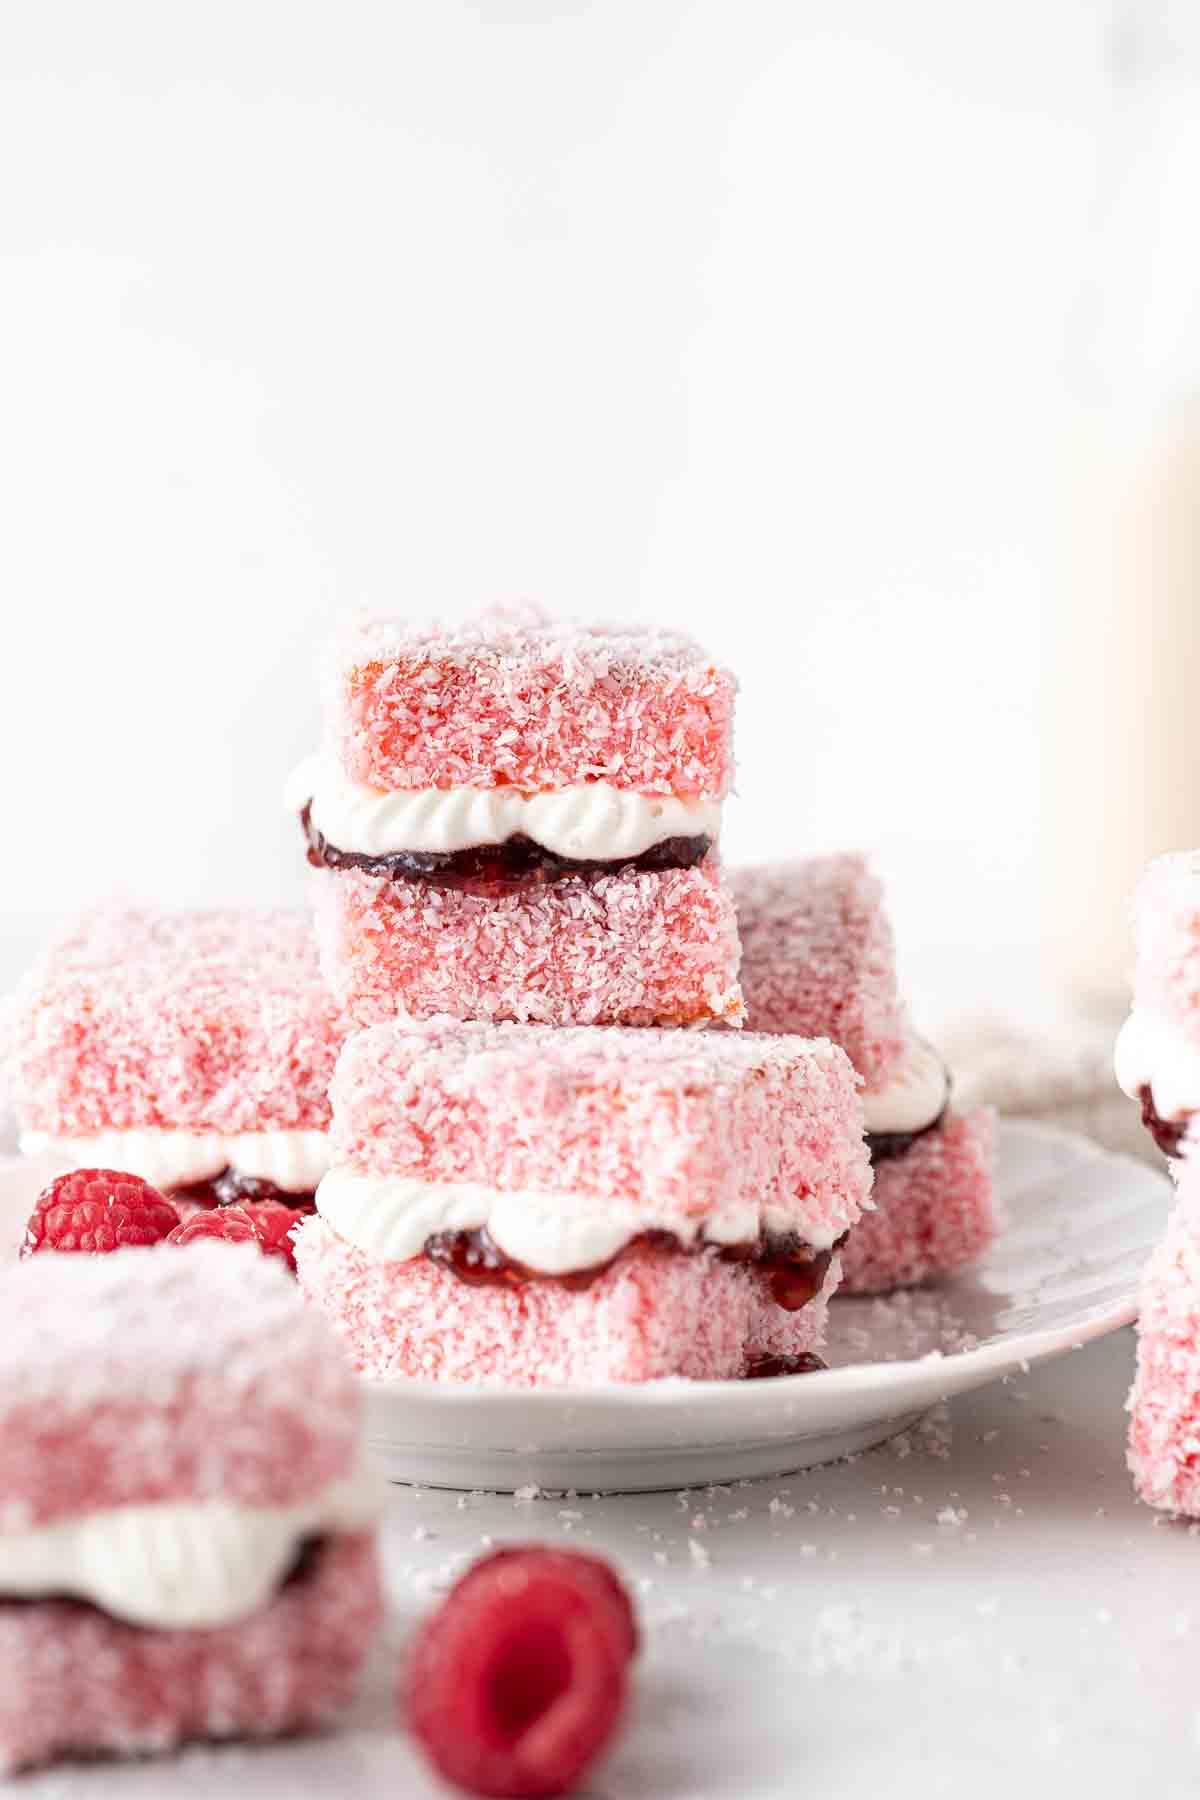 Raspberry lamingtons sandwiched with jam and cream on a white plate.